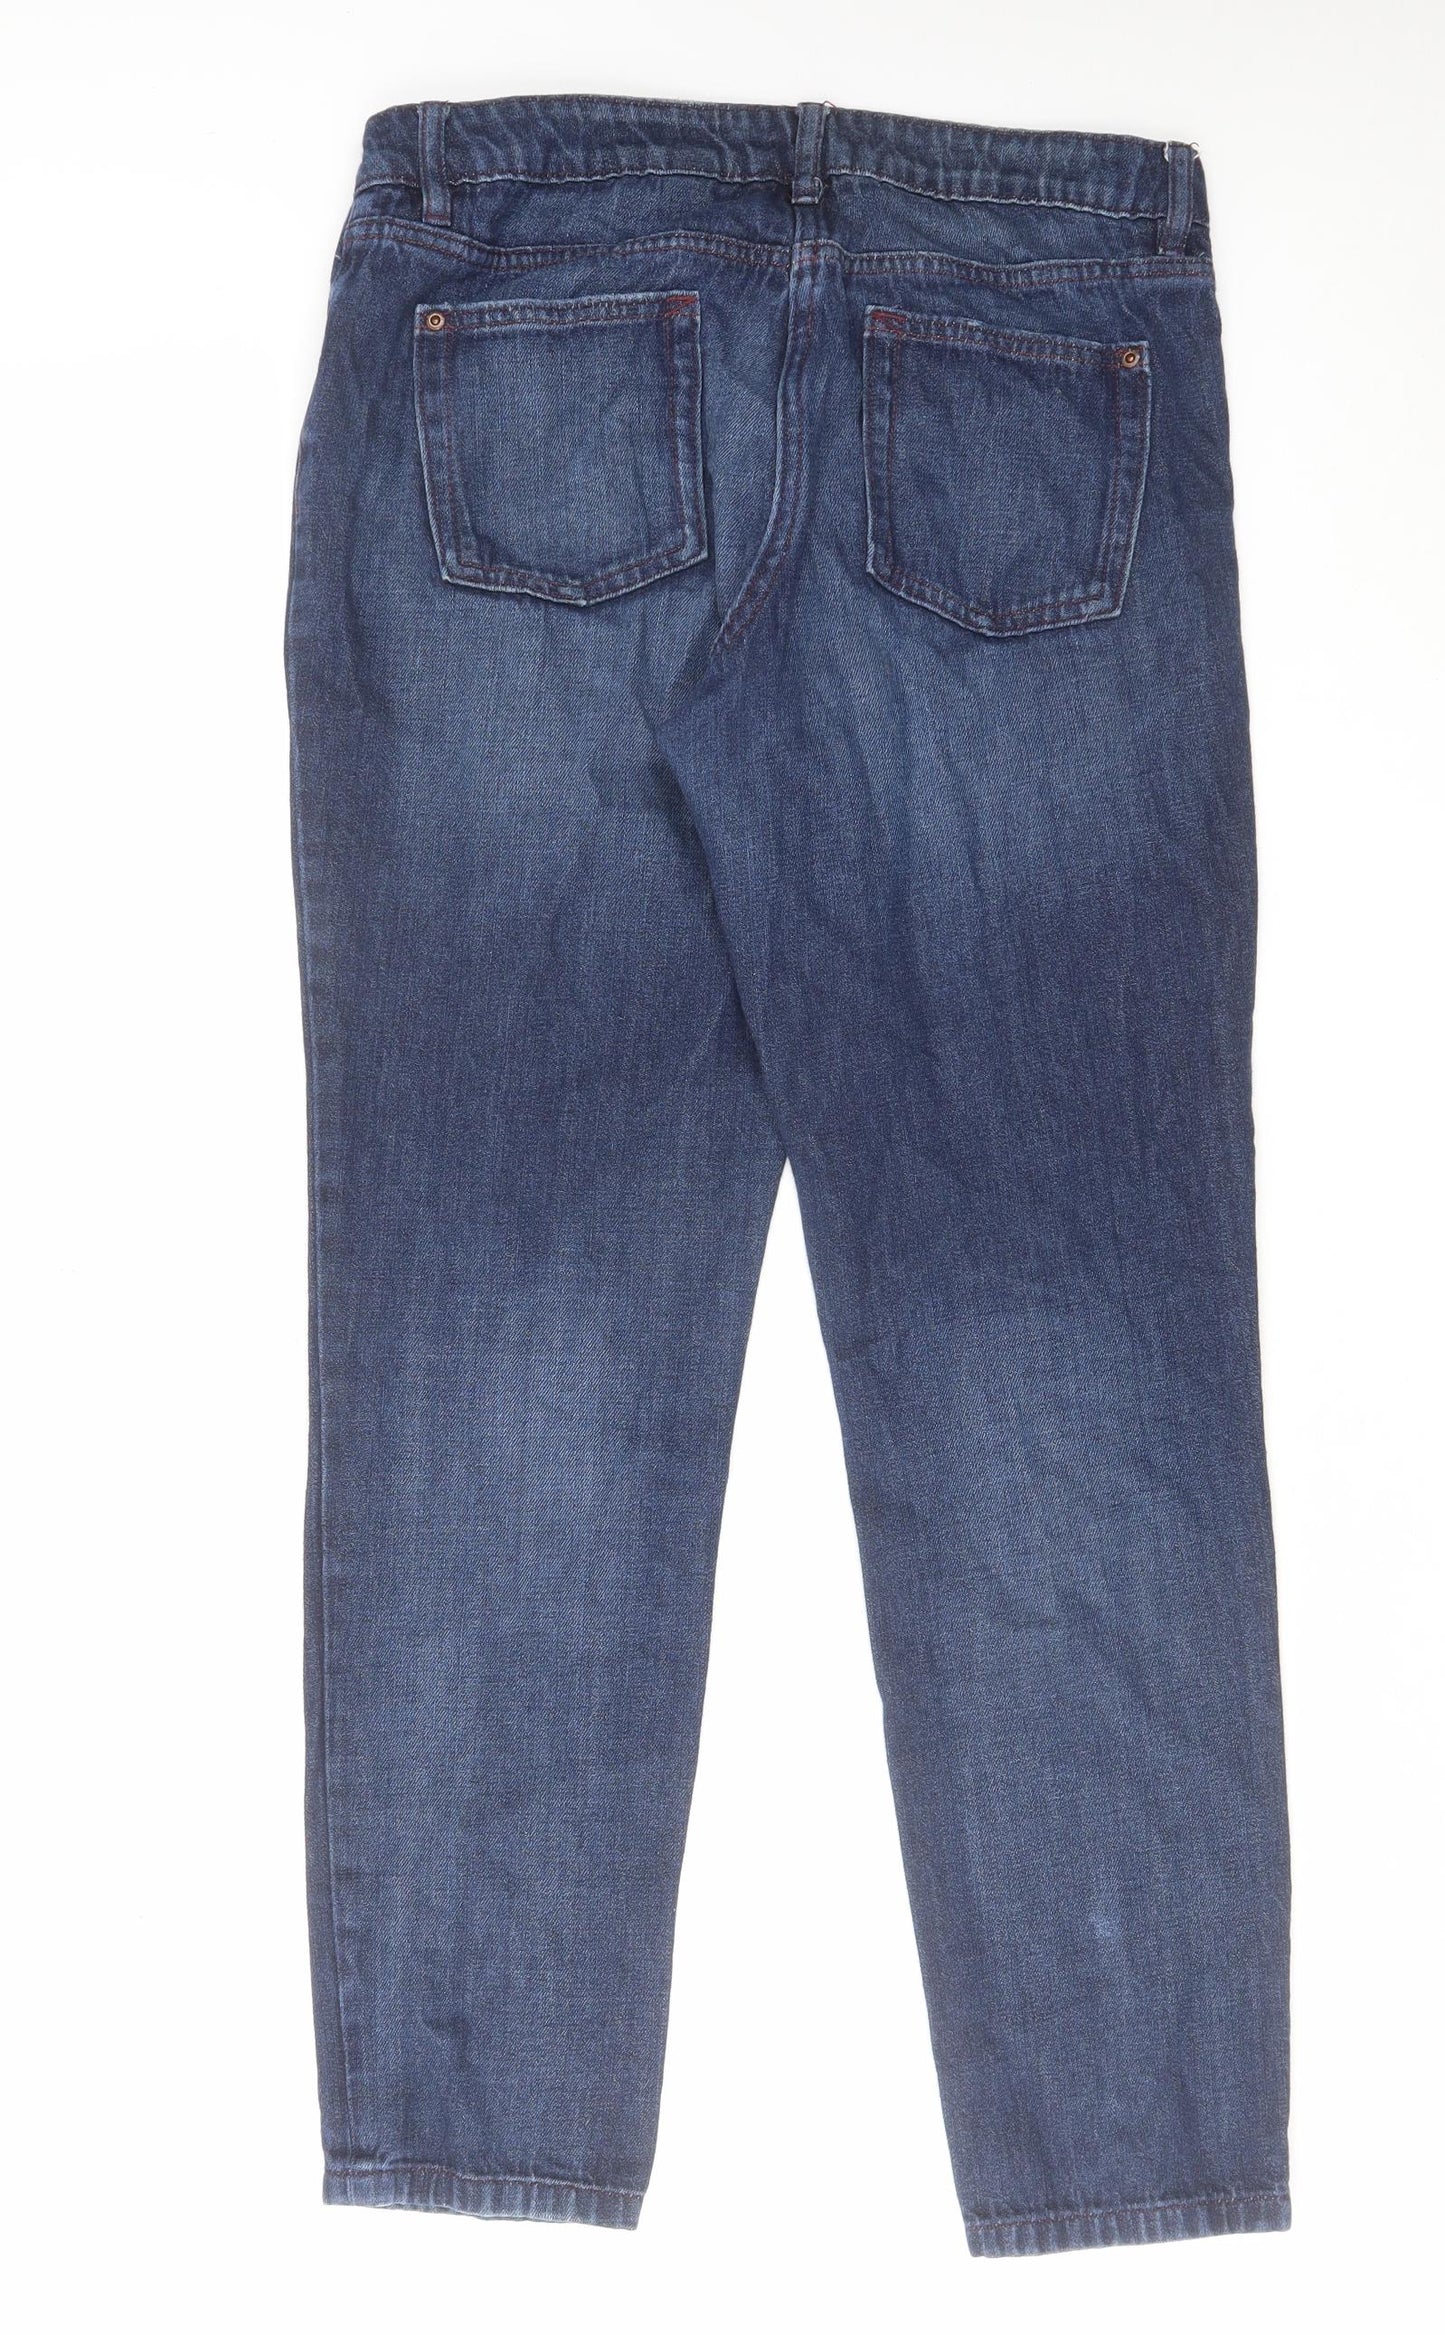 NEXT Womens Blue Cotton Tapered Jeans Size 12 L30 in Regular Zip